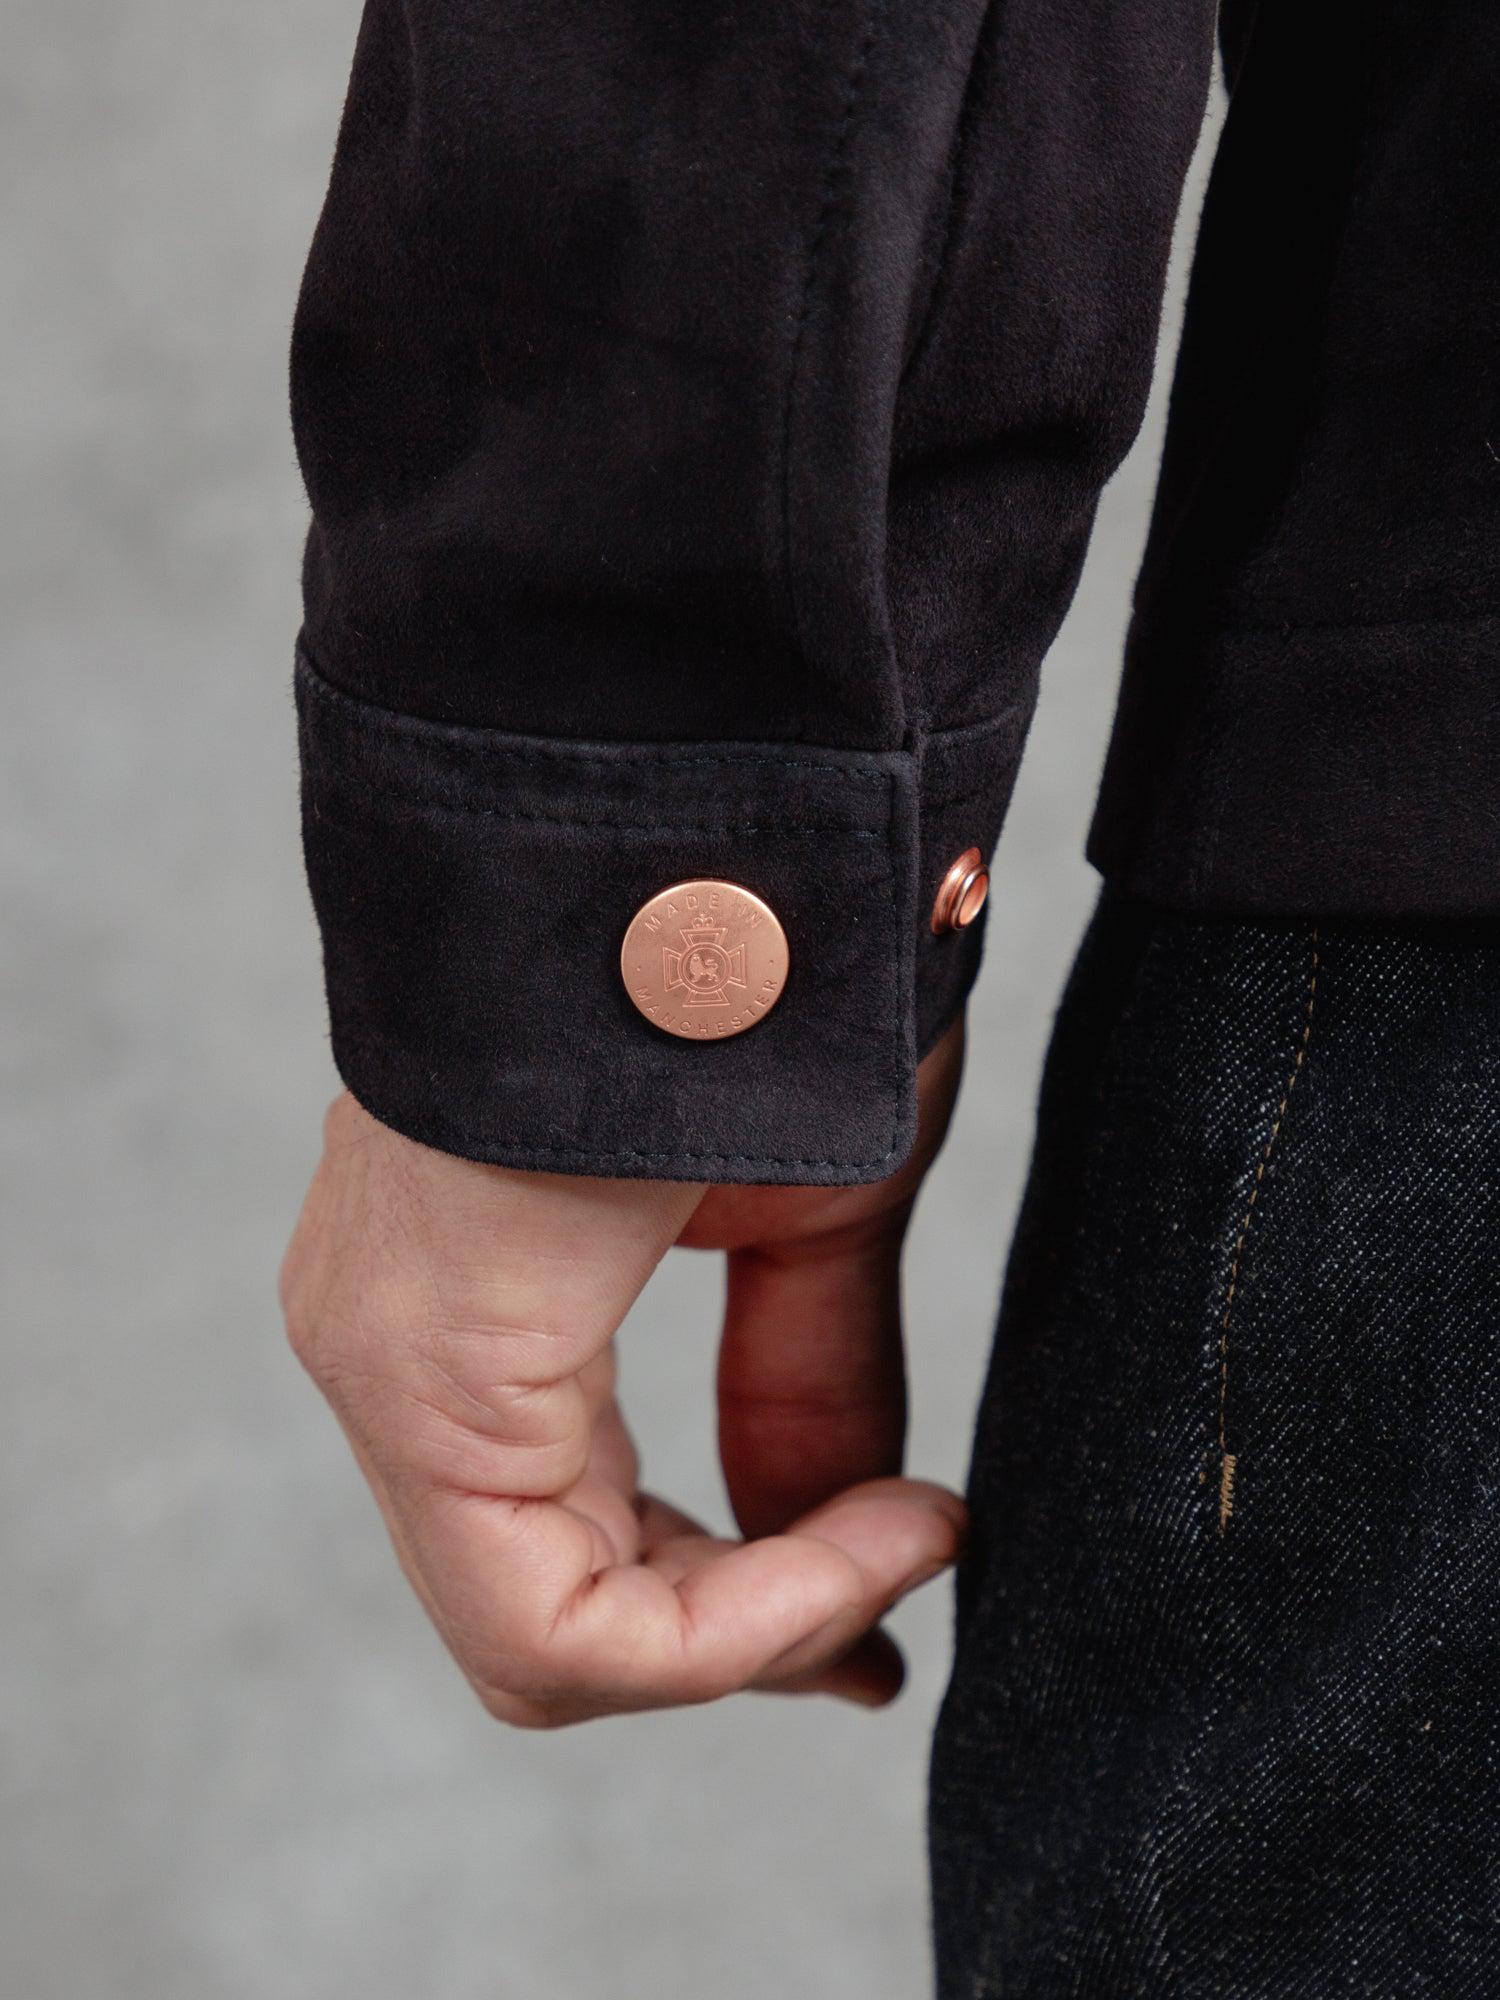 The Suede Panelled Overshirt – PrivateWhite V.C.